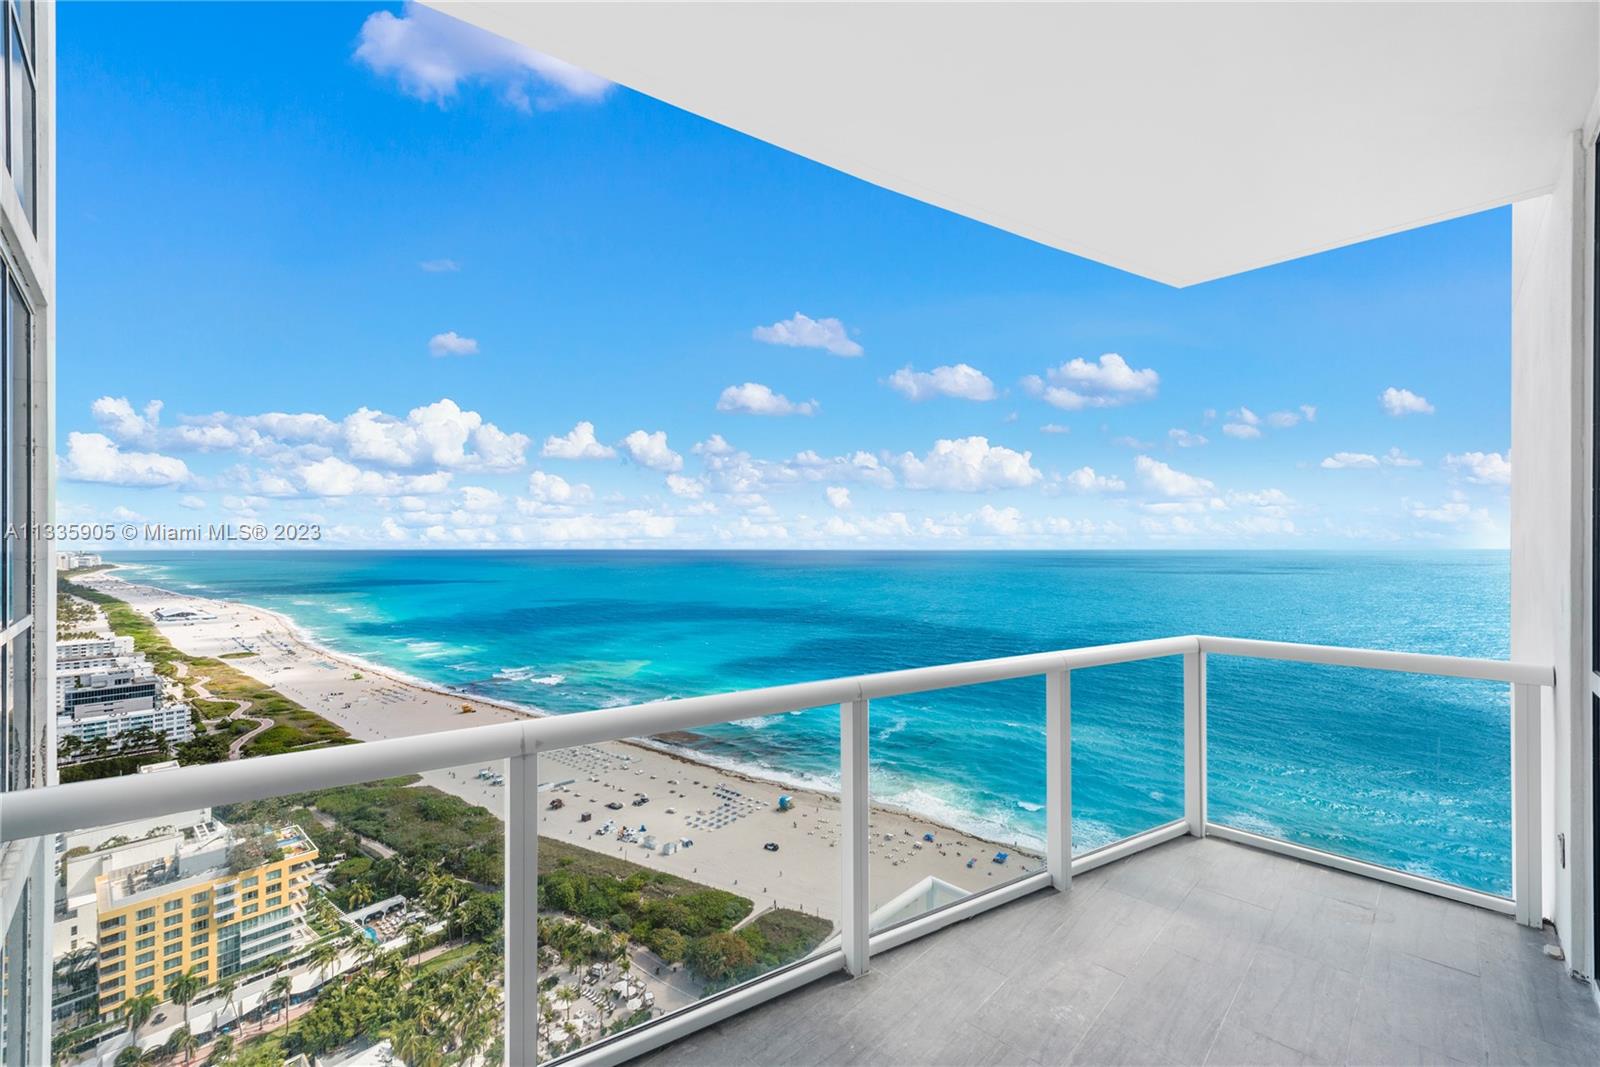 Overlooking the prized sands of South of Fifth,  #3401 welcomes you home to endless ocean views and the desirable coastline.  Settle into true bliss as you embrace life at its finest right here atop the warm Floridian sunshine framed by glossy shoreline waterscapes. A private elevator foyer opens to 3,000 sqft 4 bed layout with glass walls highlighting the sensational vistas. Singular opportunity to tailor your beachfront jewel in the coveted Continuum, which sets the standard in 5-star luxury resort living. Continuum 12 acres boast, private beach club, three tennis courts, two pools, outdoor restaurant, gym, spa, concierge, more. #3401 is ready to welcome you to oceanfront paradise – all just steps away from world-class dining, shopping & entertainment options for utmost convenience!